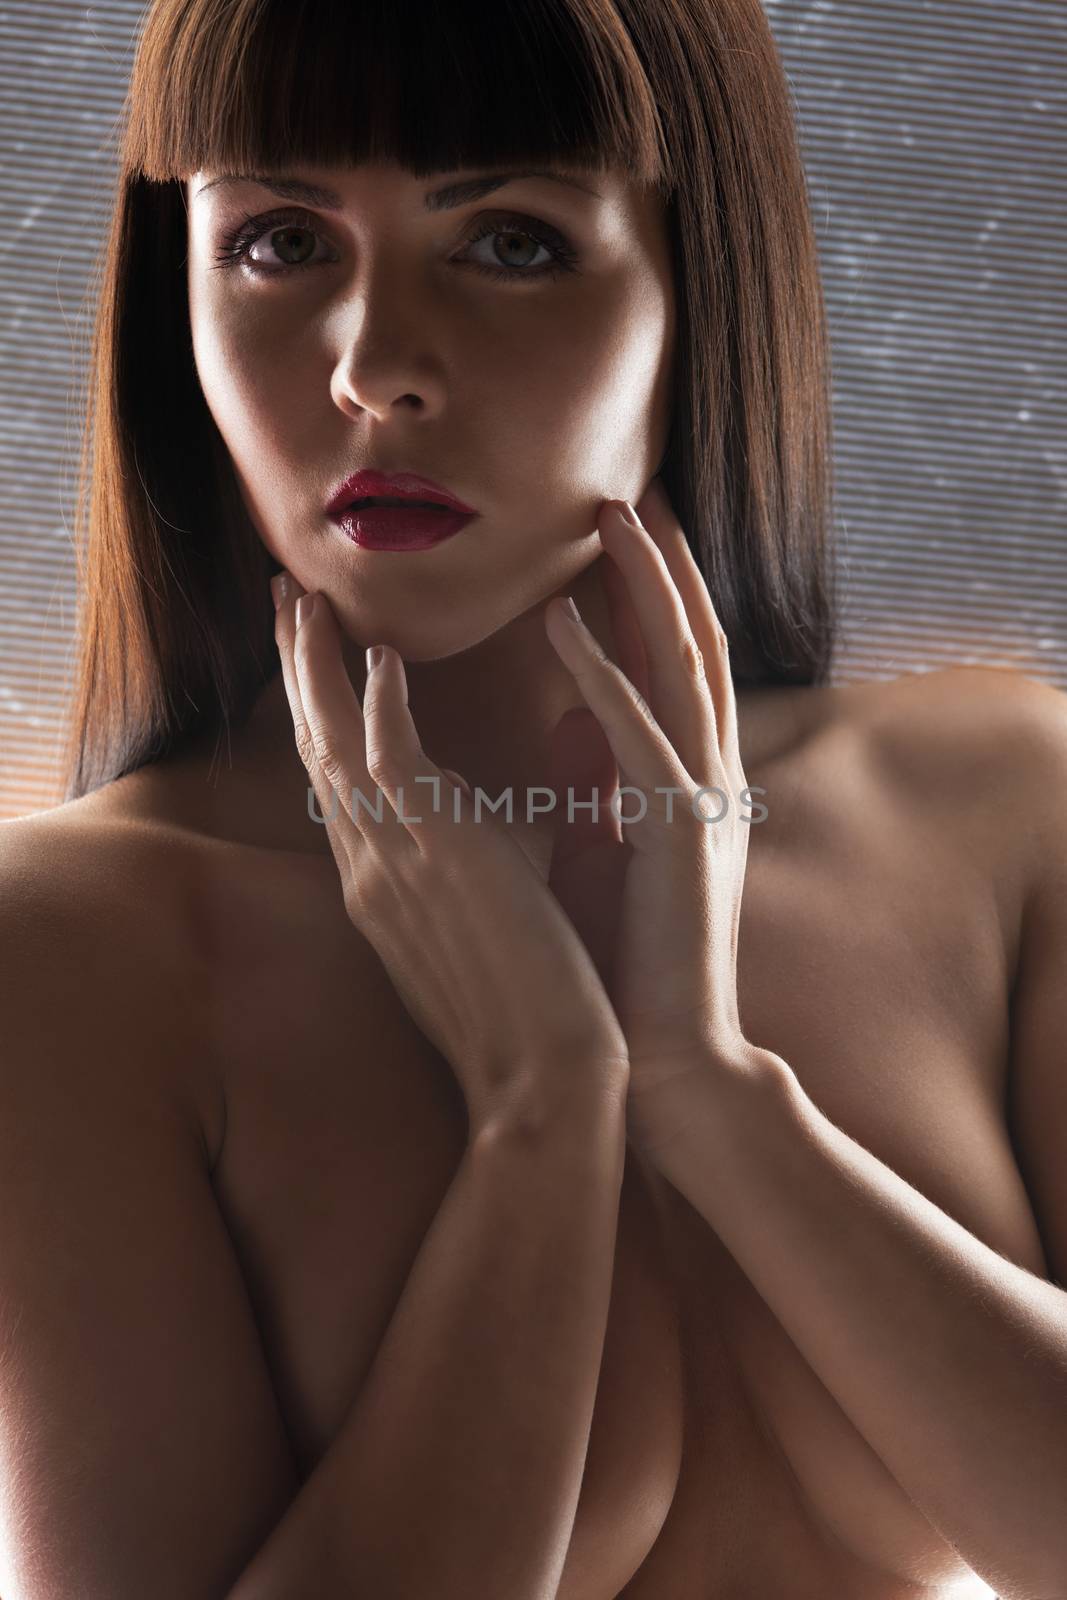 health and beauty concept - beautiful topless woman